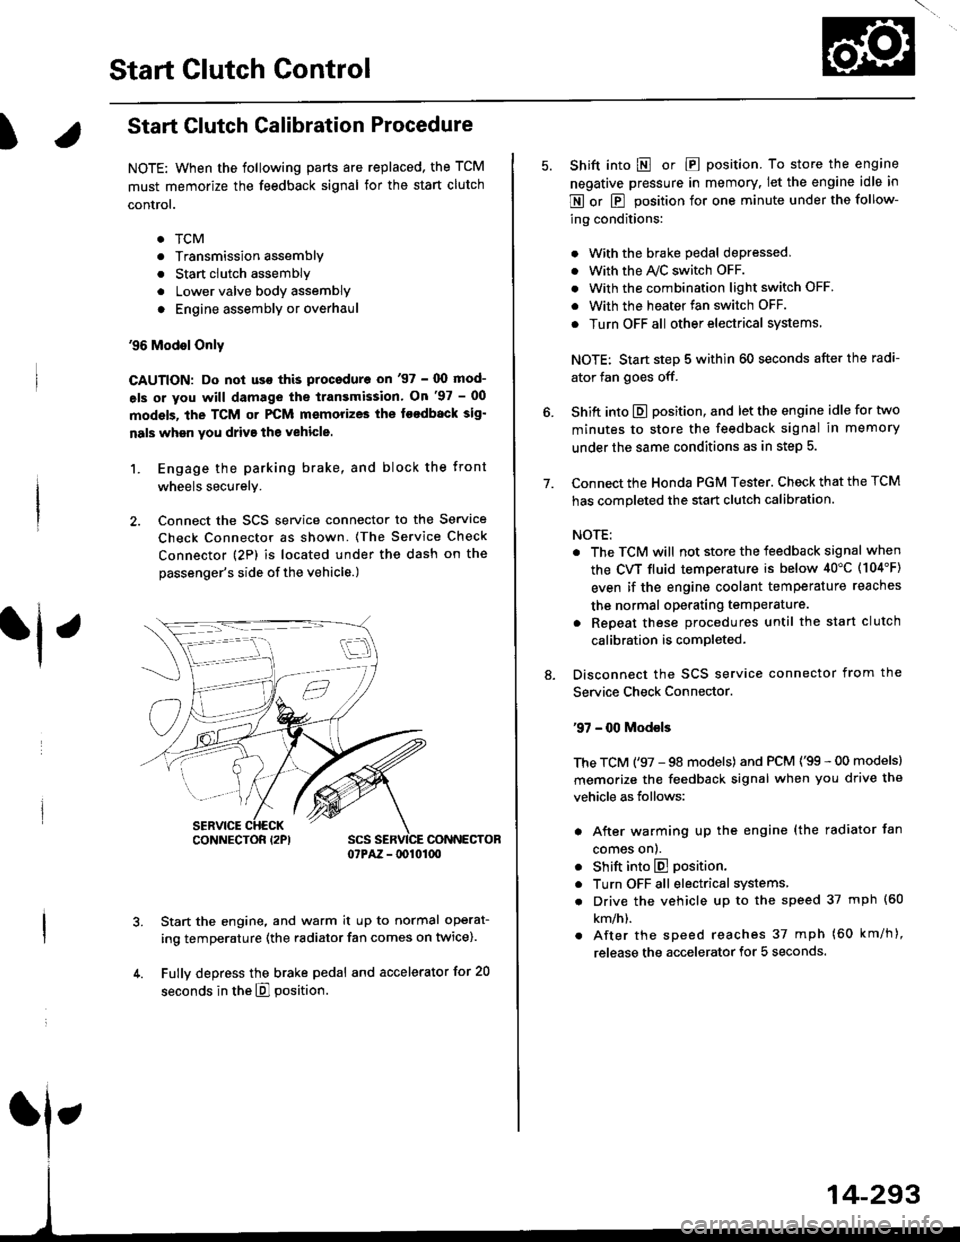 HONDA CIVIC 2000 6.G Service Manual Start Clutch Control@
T
Start Clutch Calibration Procedure
NOTE: When the following parts are replaced, the TCM
must memorize the feedback signal for the start clutch
control.
. TCM
. Transmissionasse